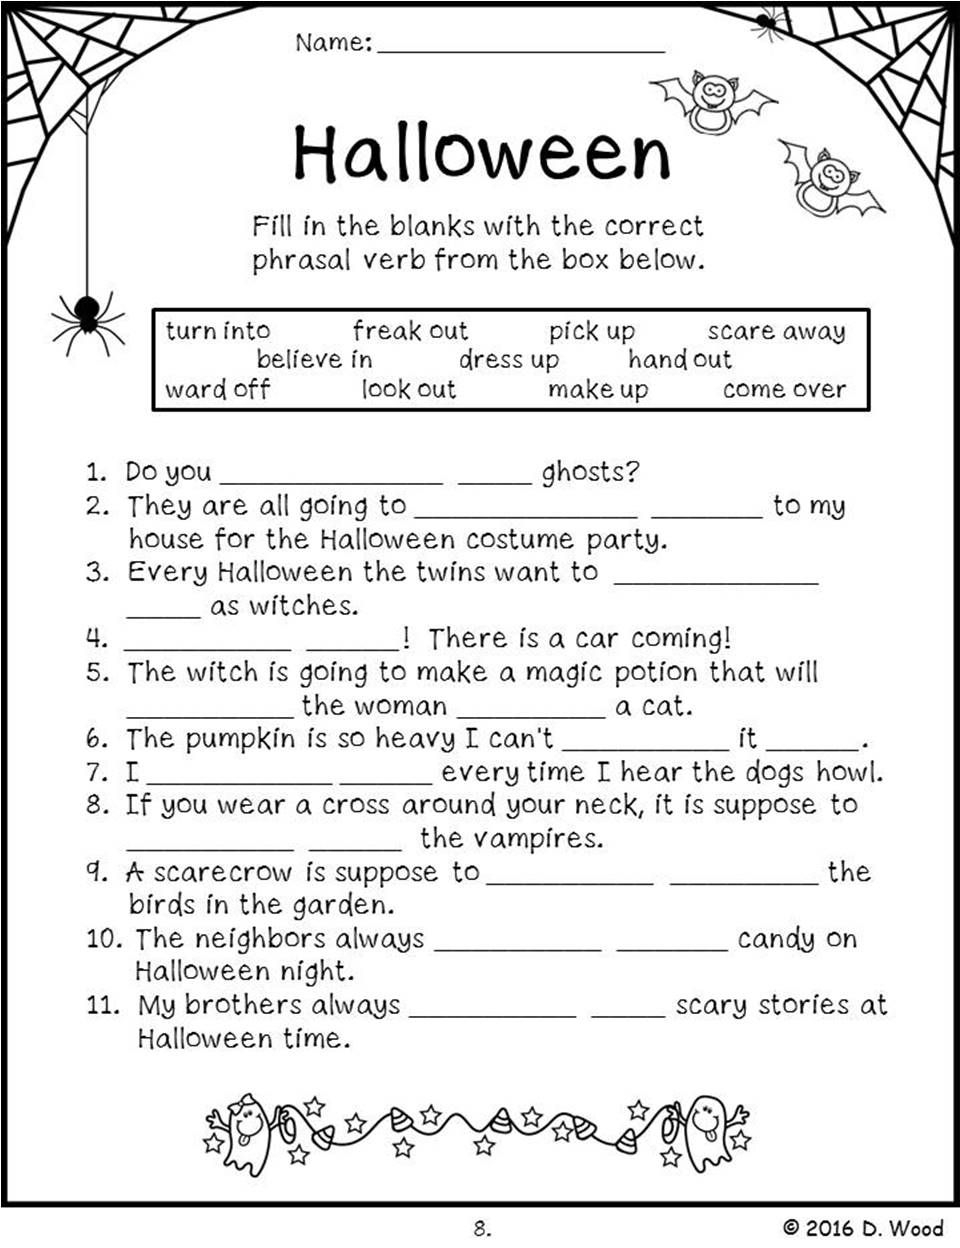 Fill In The Blanks Story Worksheets Pdf Halloween 